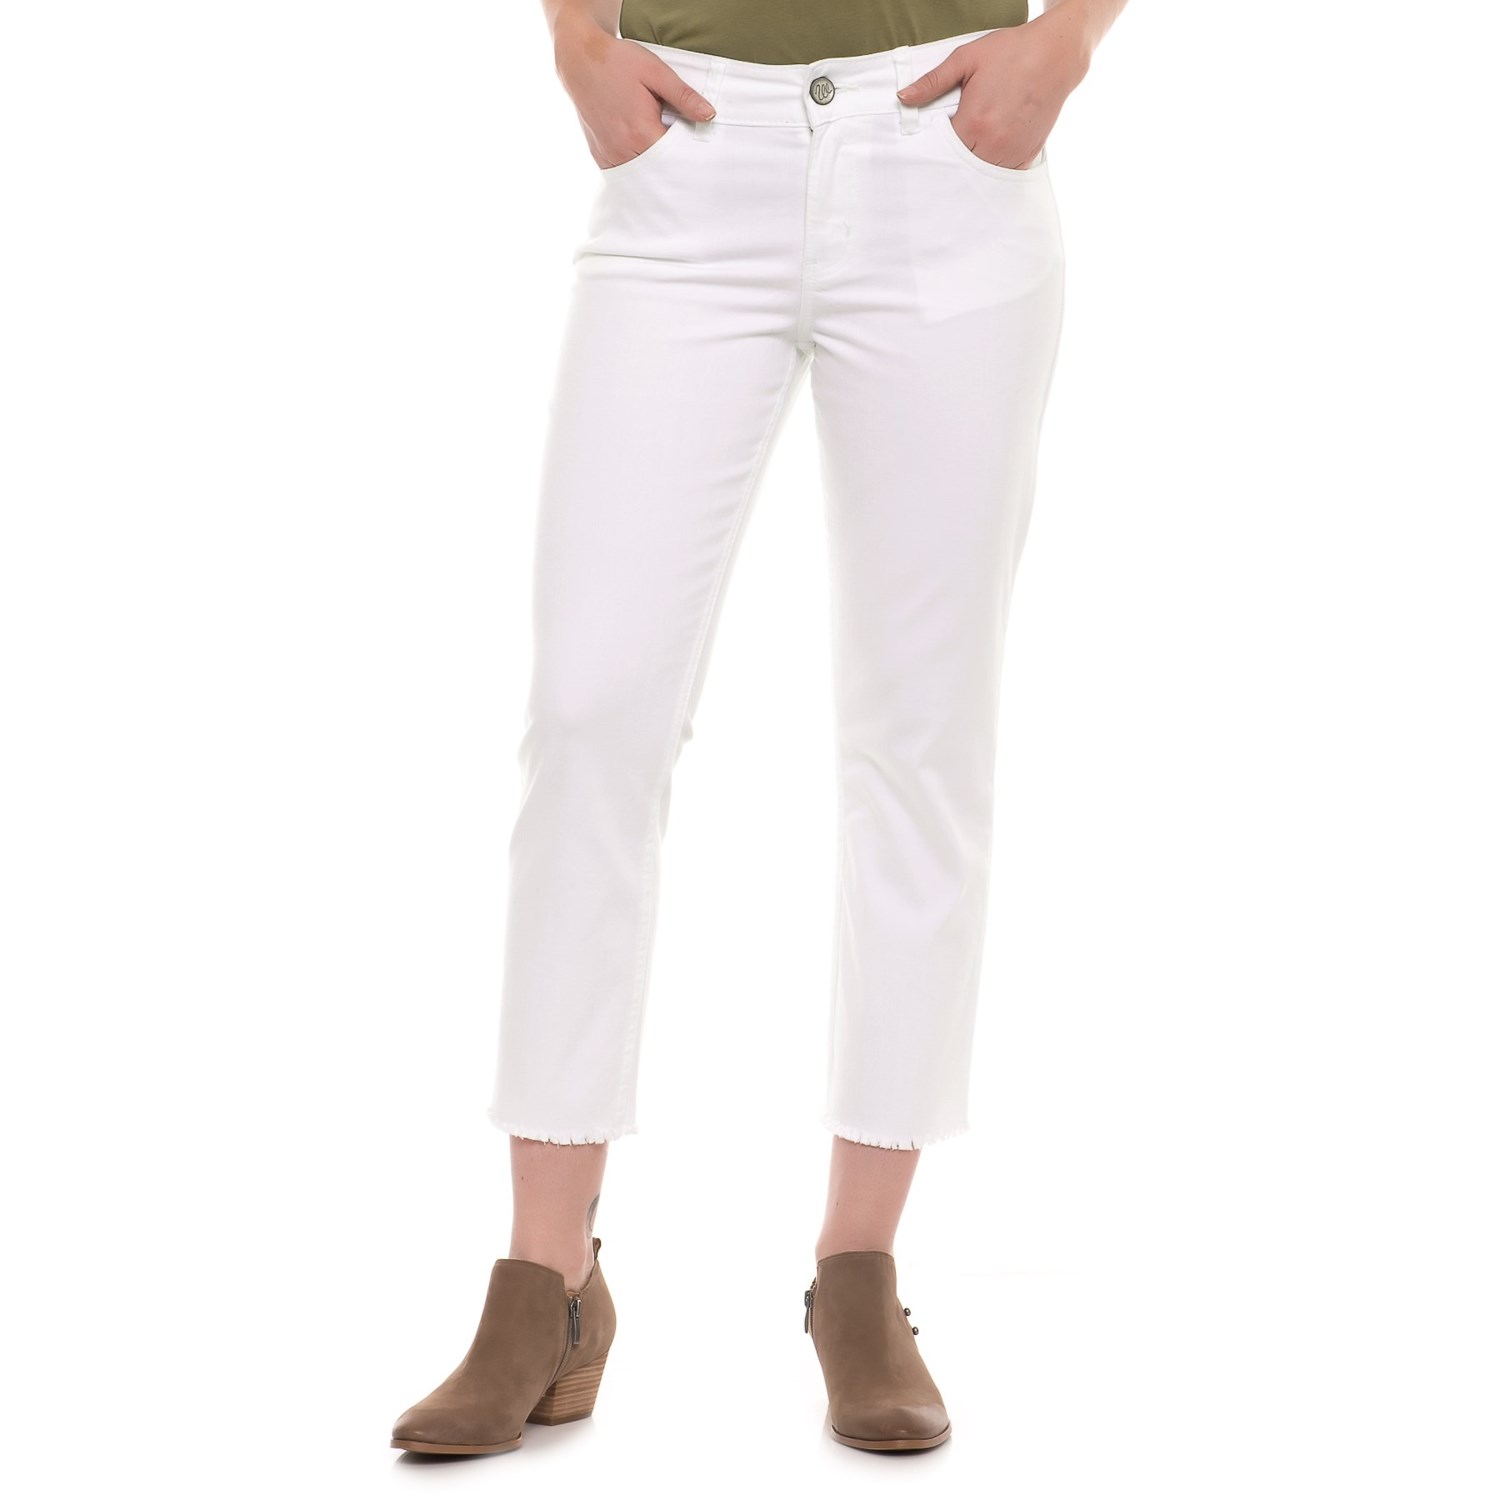 Wrangler Retro Mae Crop Jeans – Mid Rise (For Women)